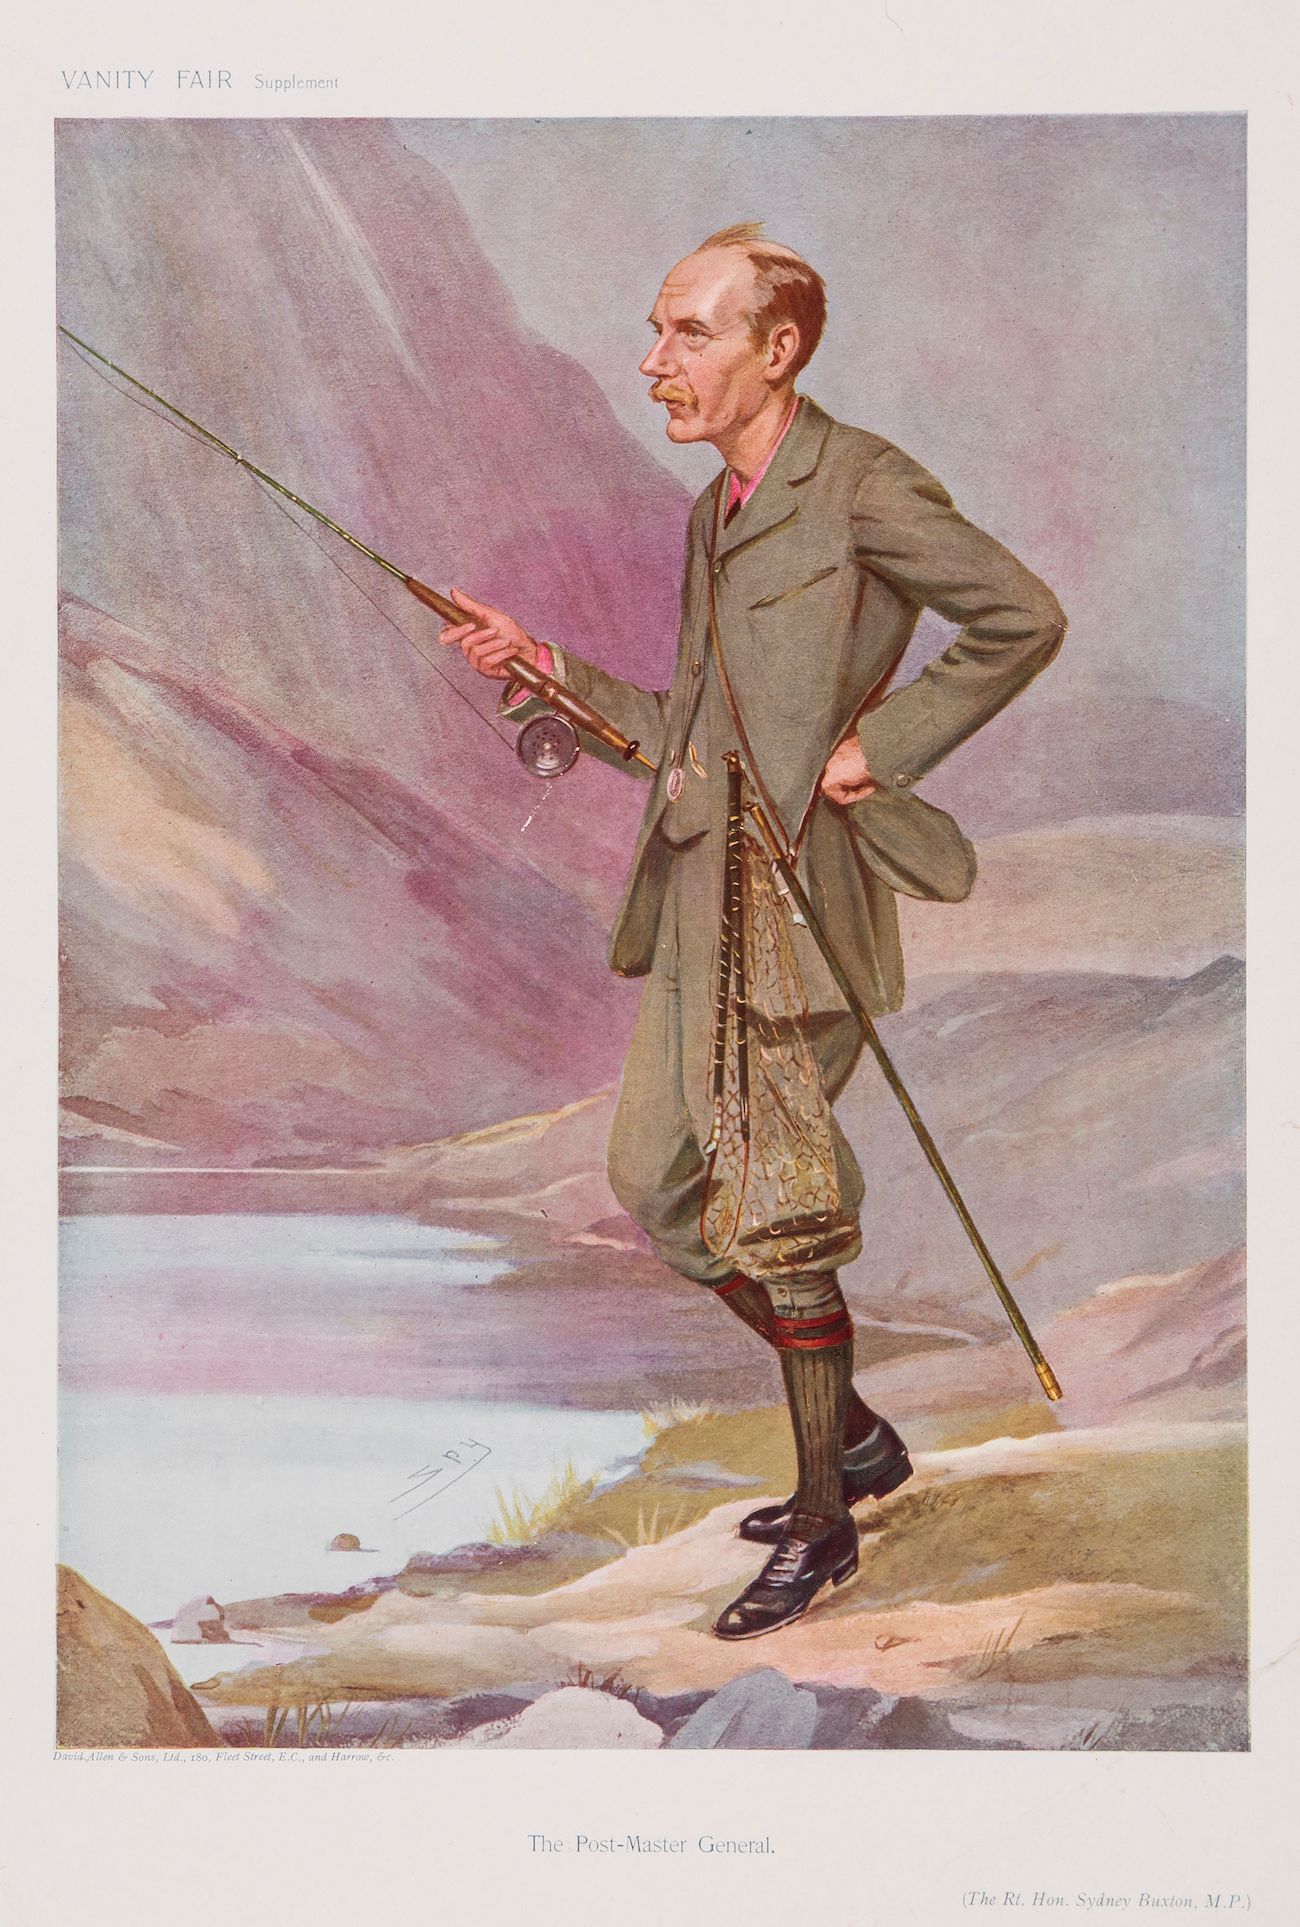 Ward (Sir Leslie Matthew) "Spy" - The Post-Master General. fly fishing caricature of the Rt. Hon.